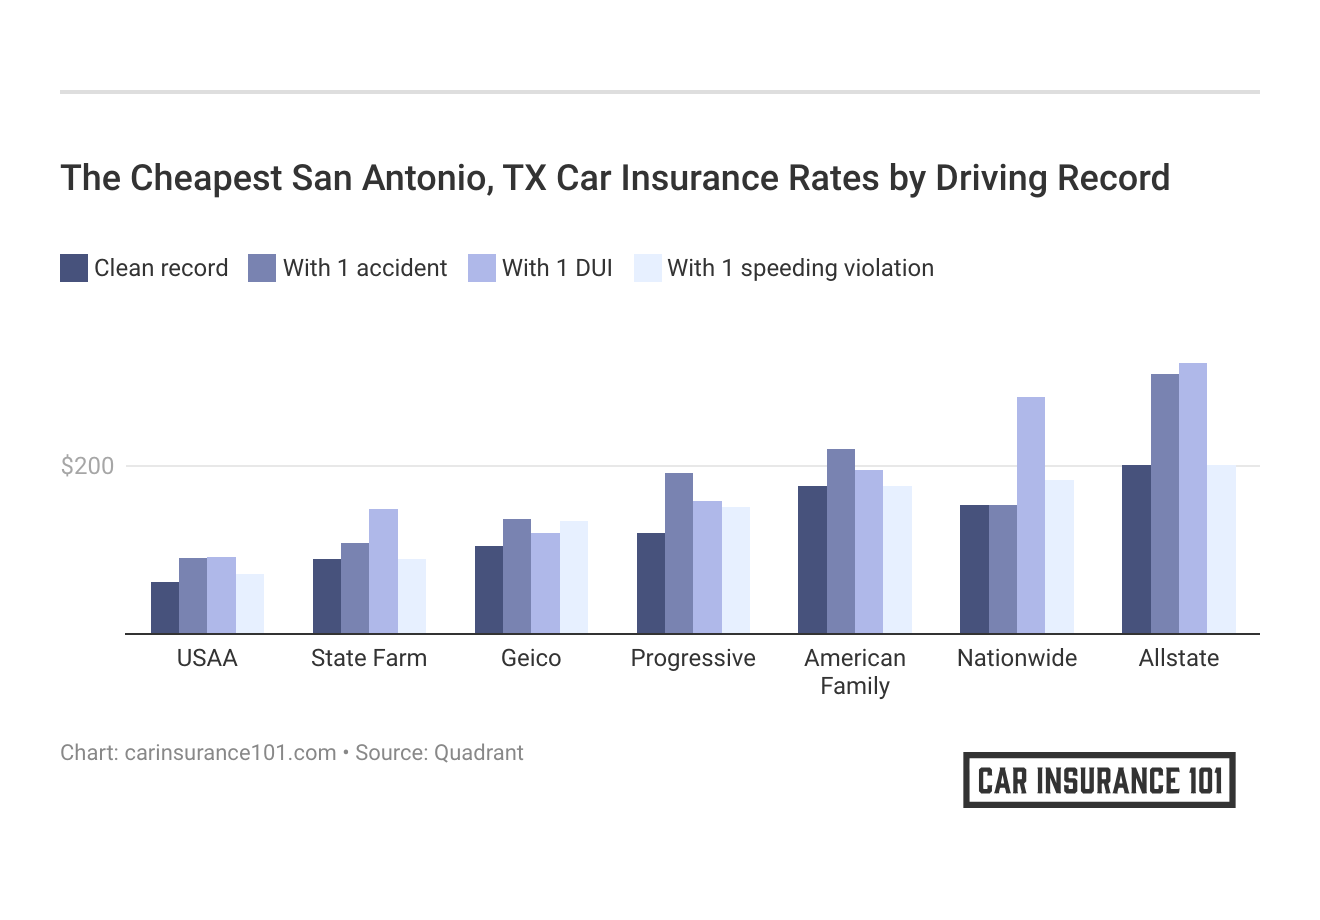 <h3>The Cheapest San Antonio, TX Car Insurance Rates by Driving Record</h3>